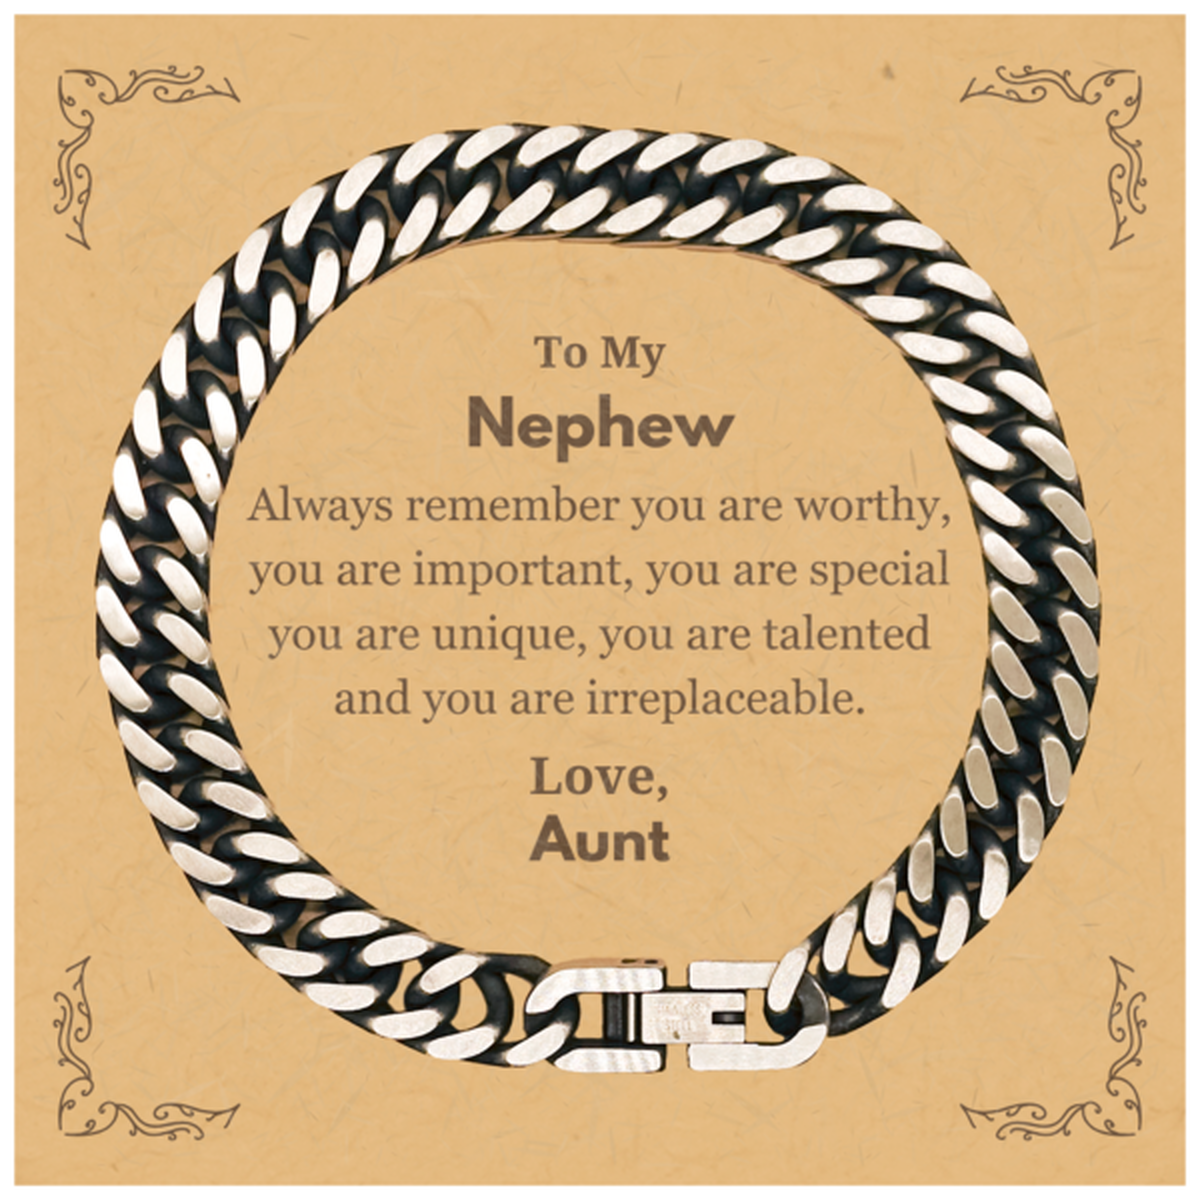 Nephew Birthday Gifts from Aunt, Inspirational Cuban Link Chain Bracelet for Nephew Christmas Graduation Gifts for Nephew Always remember you are worthy, you are important. Love, Aunt